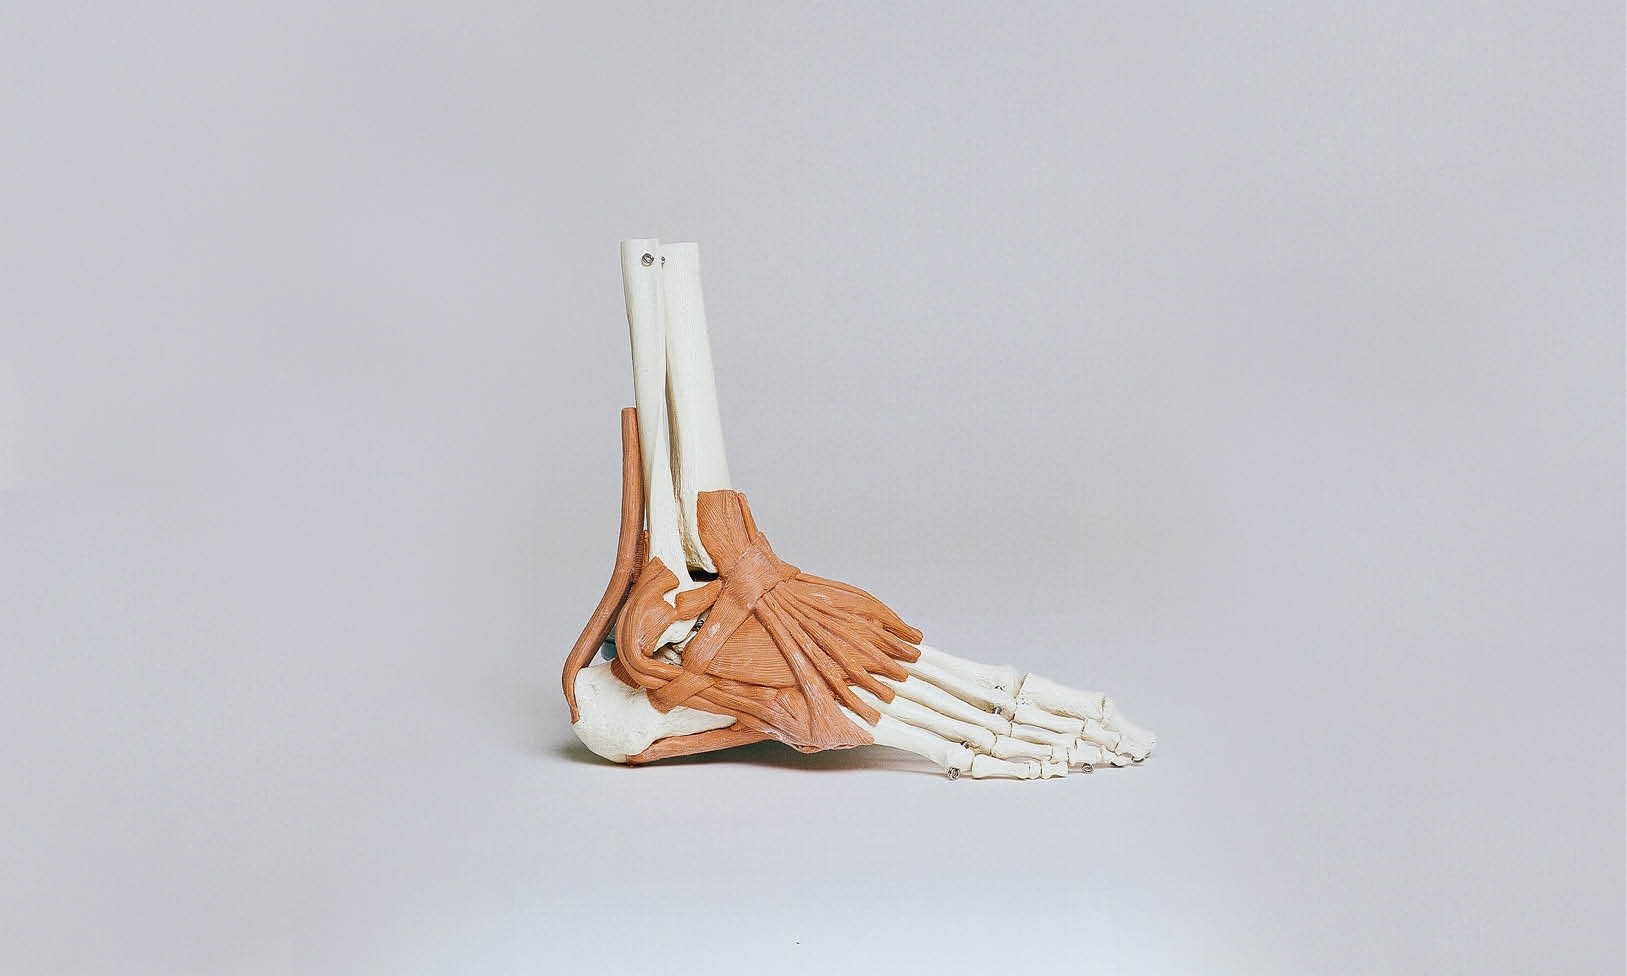 A model of the bones of the foot and the red ankle musculature in front of a grey background